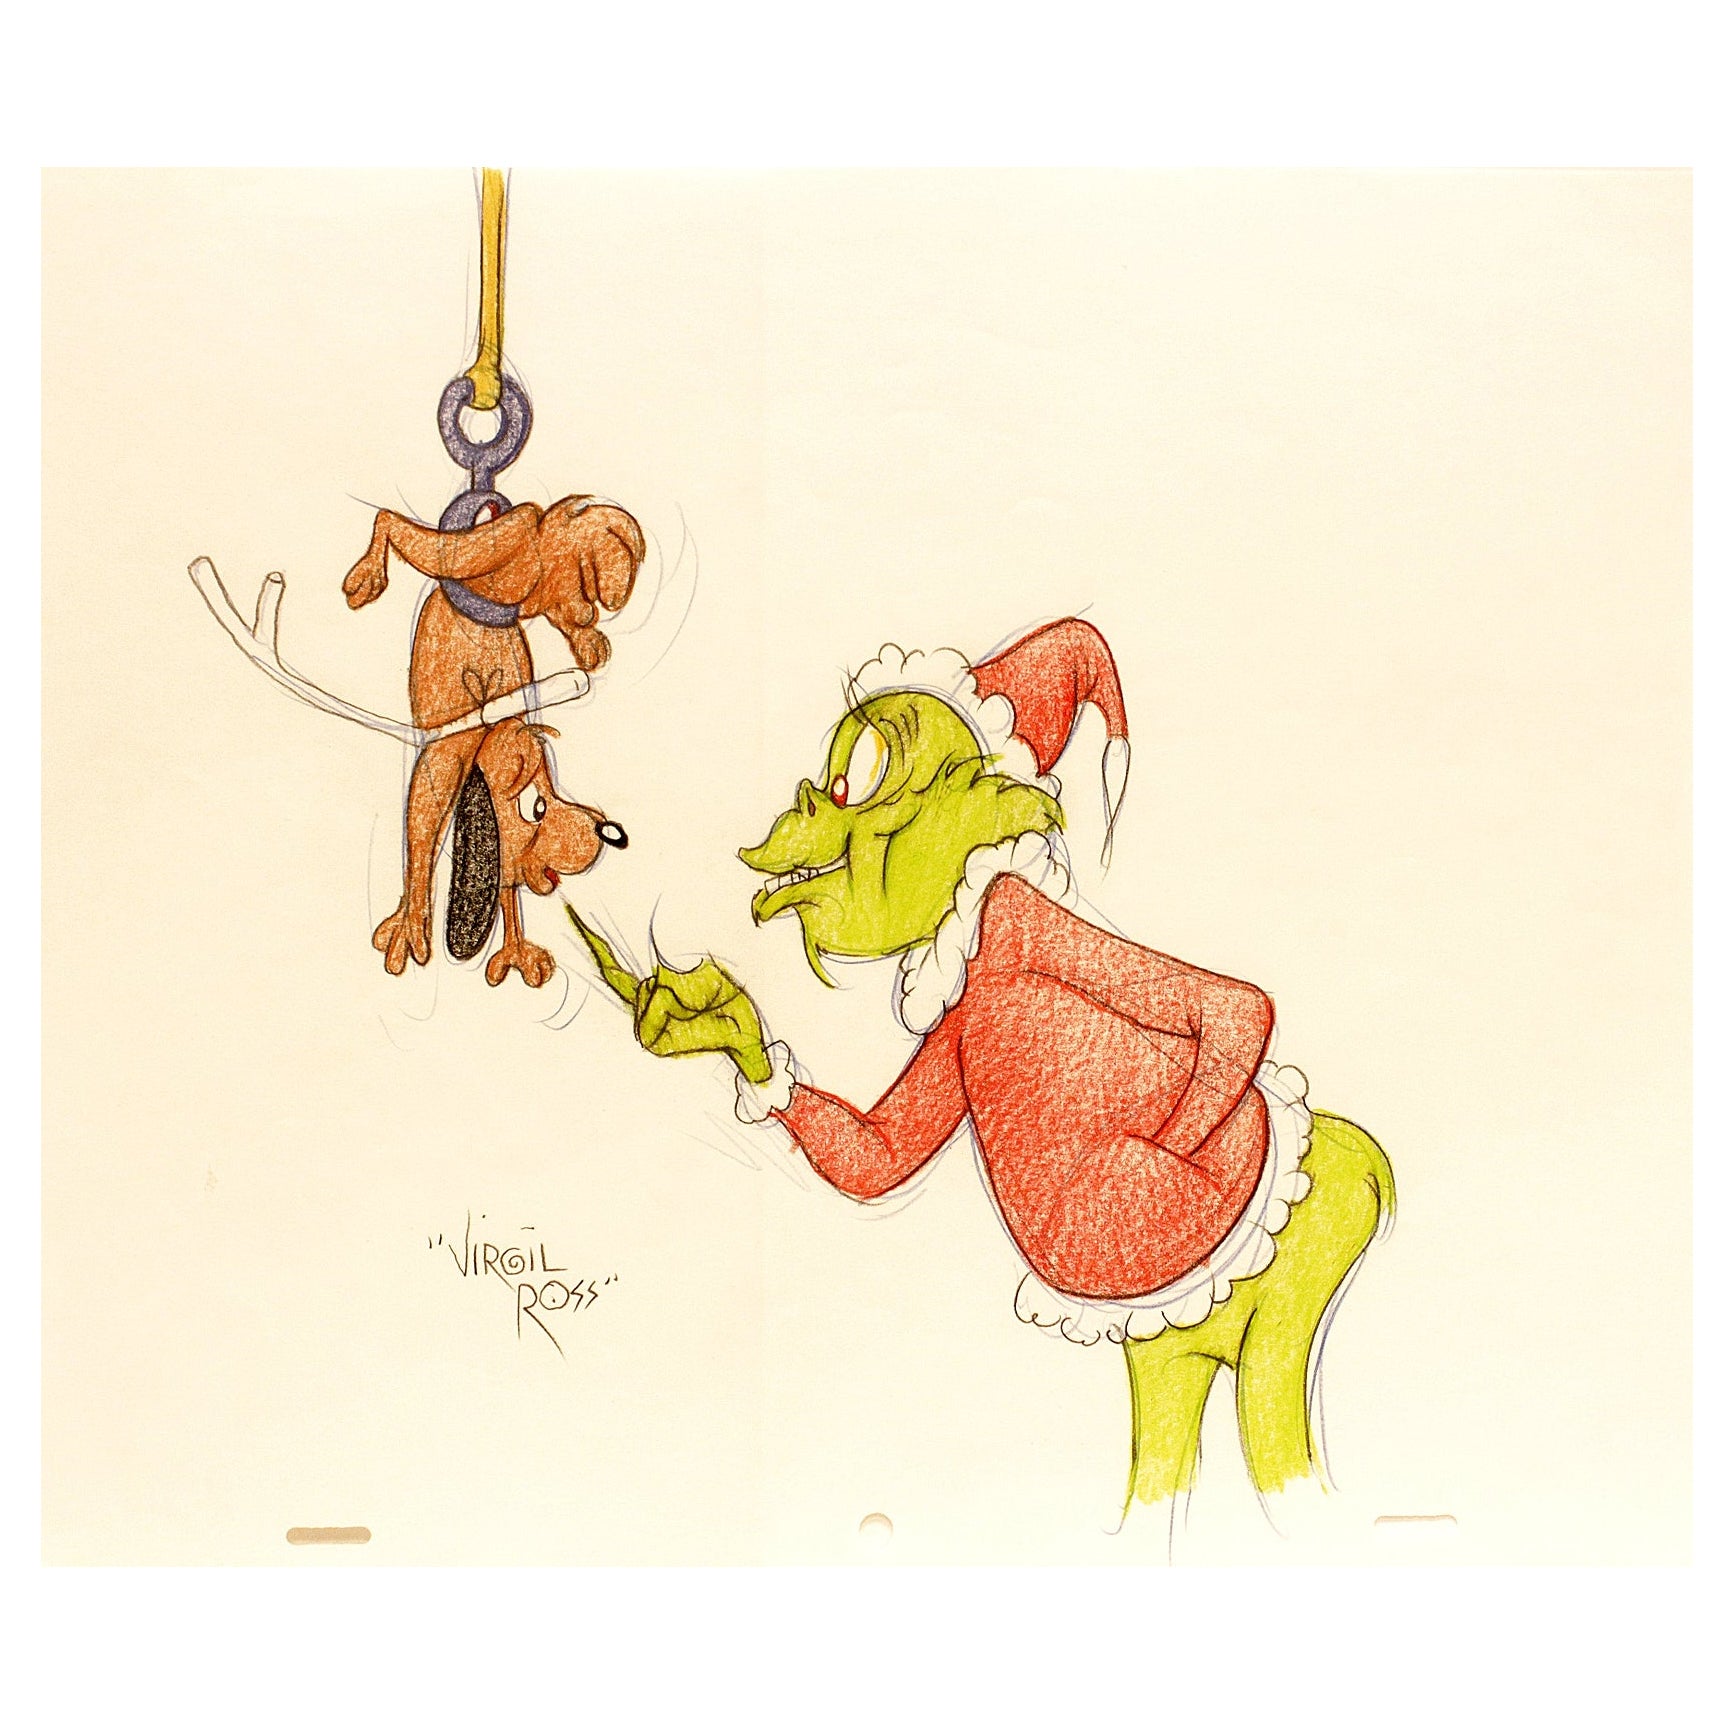 Dr. Seuss (Virgil Ross). How The Grinch Stole Christmas & Max ORIGINAL DRAWING